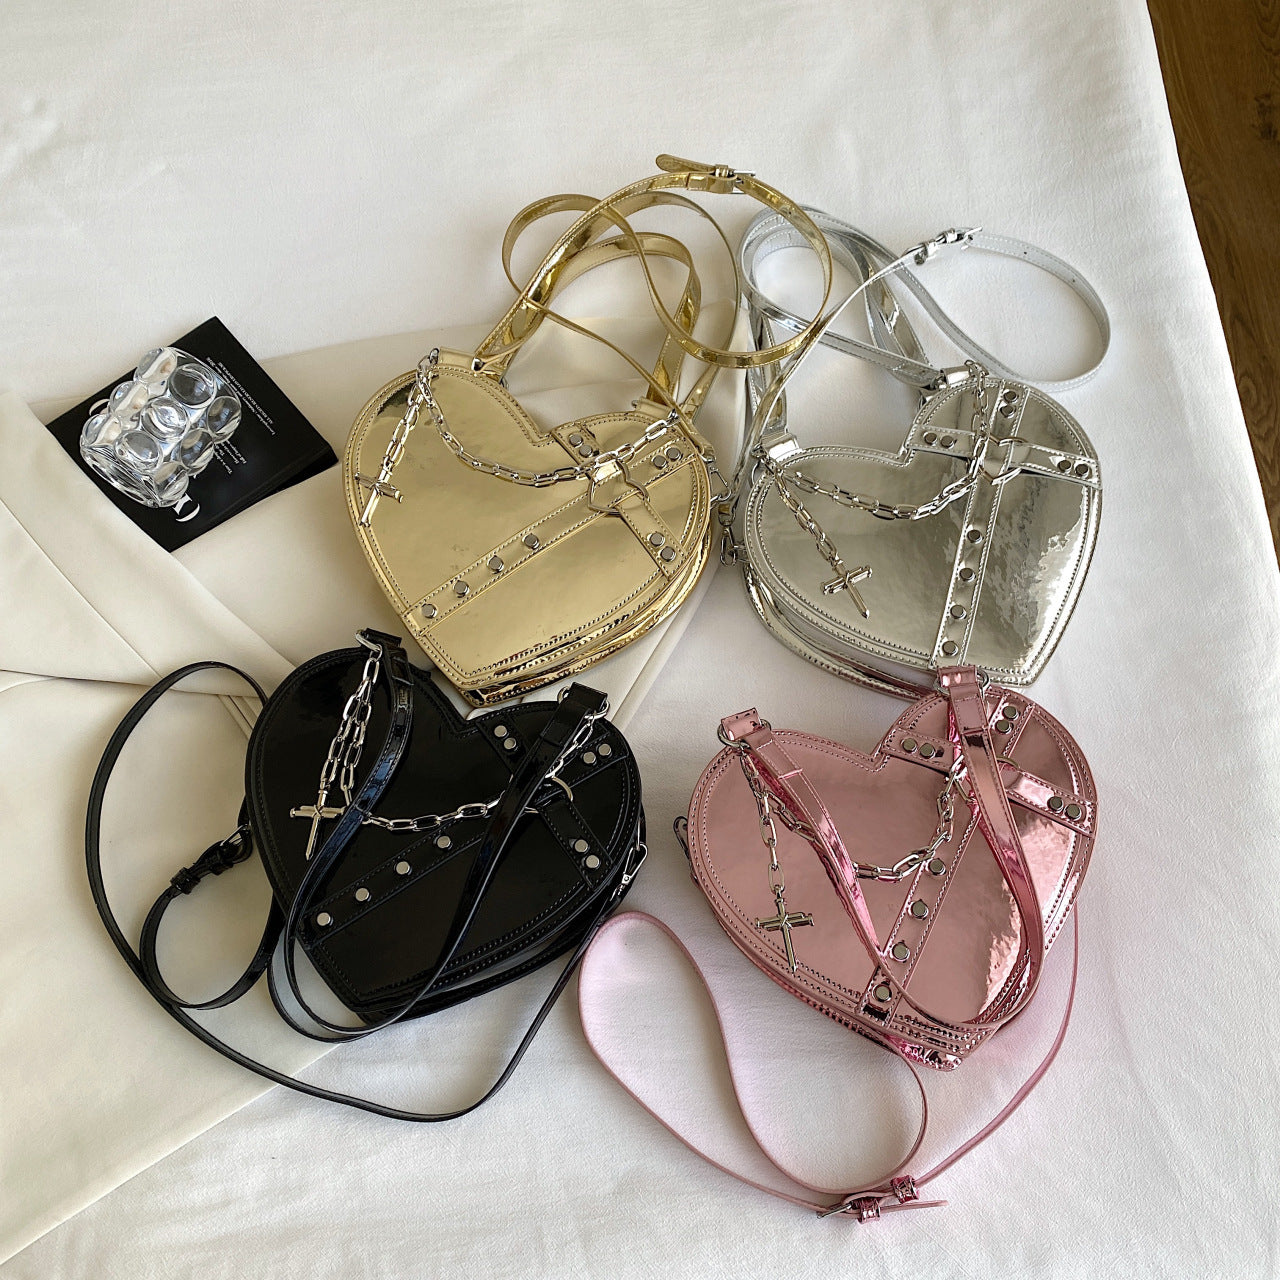 Chain Heart-shaped Bags Large Capacity Love Shoulder Bag For Women Valentine's Day